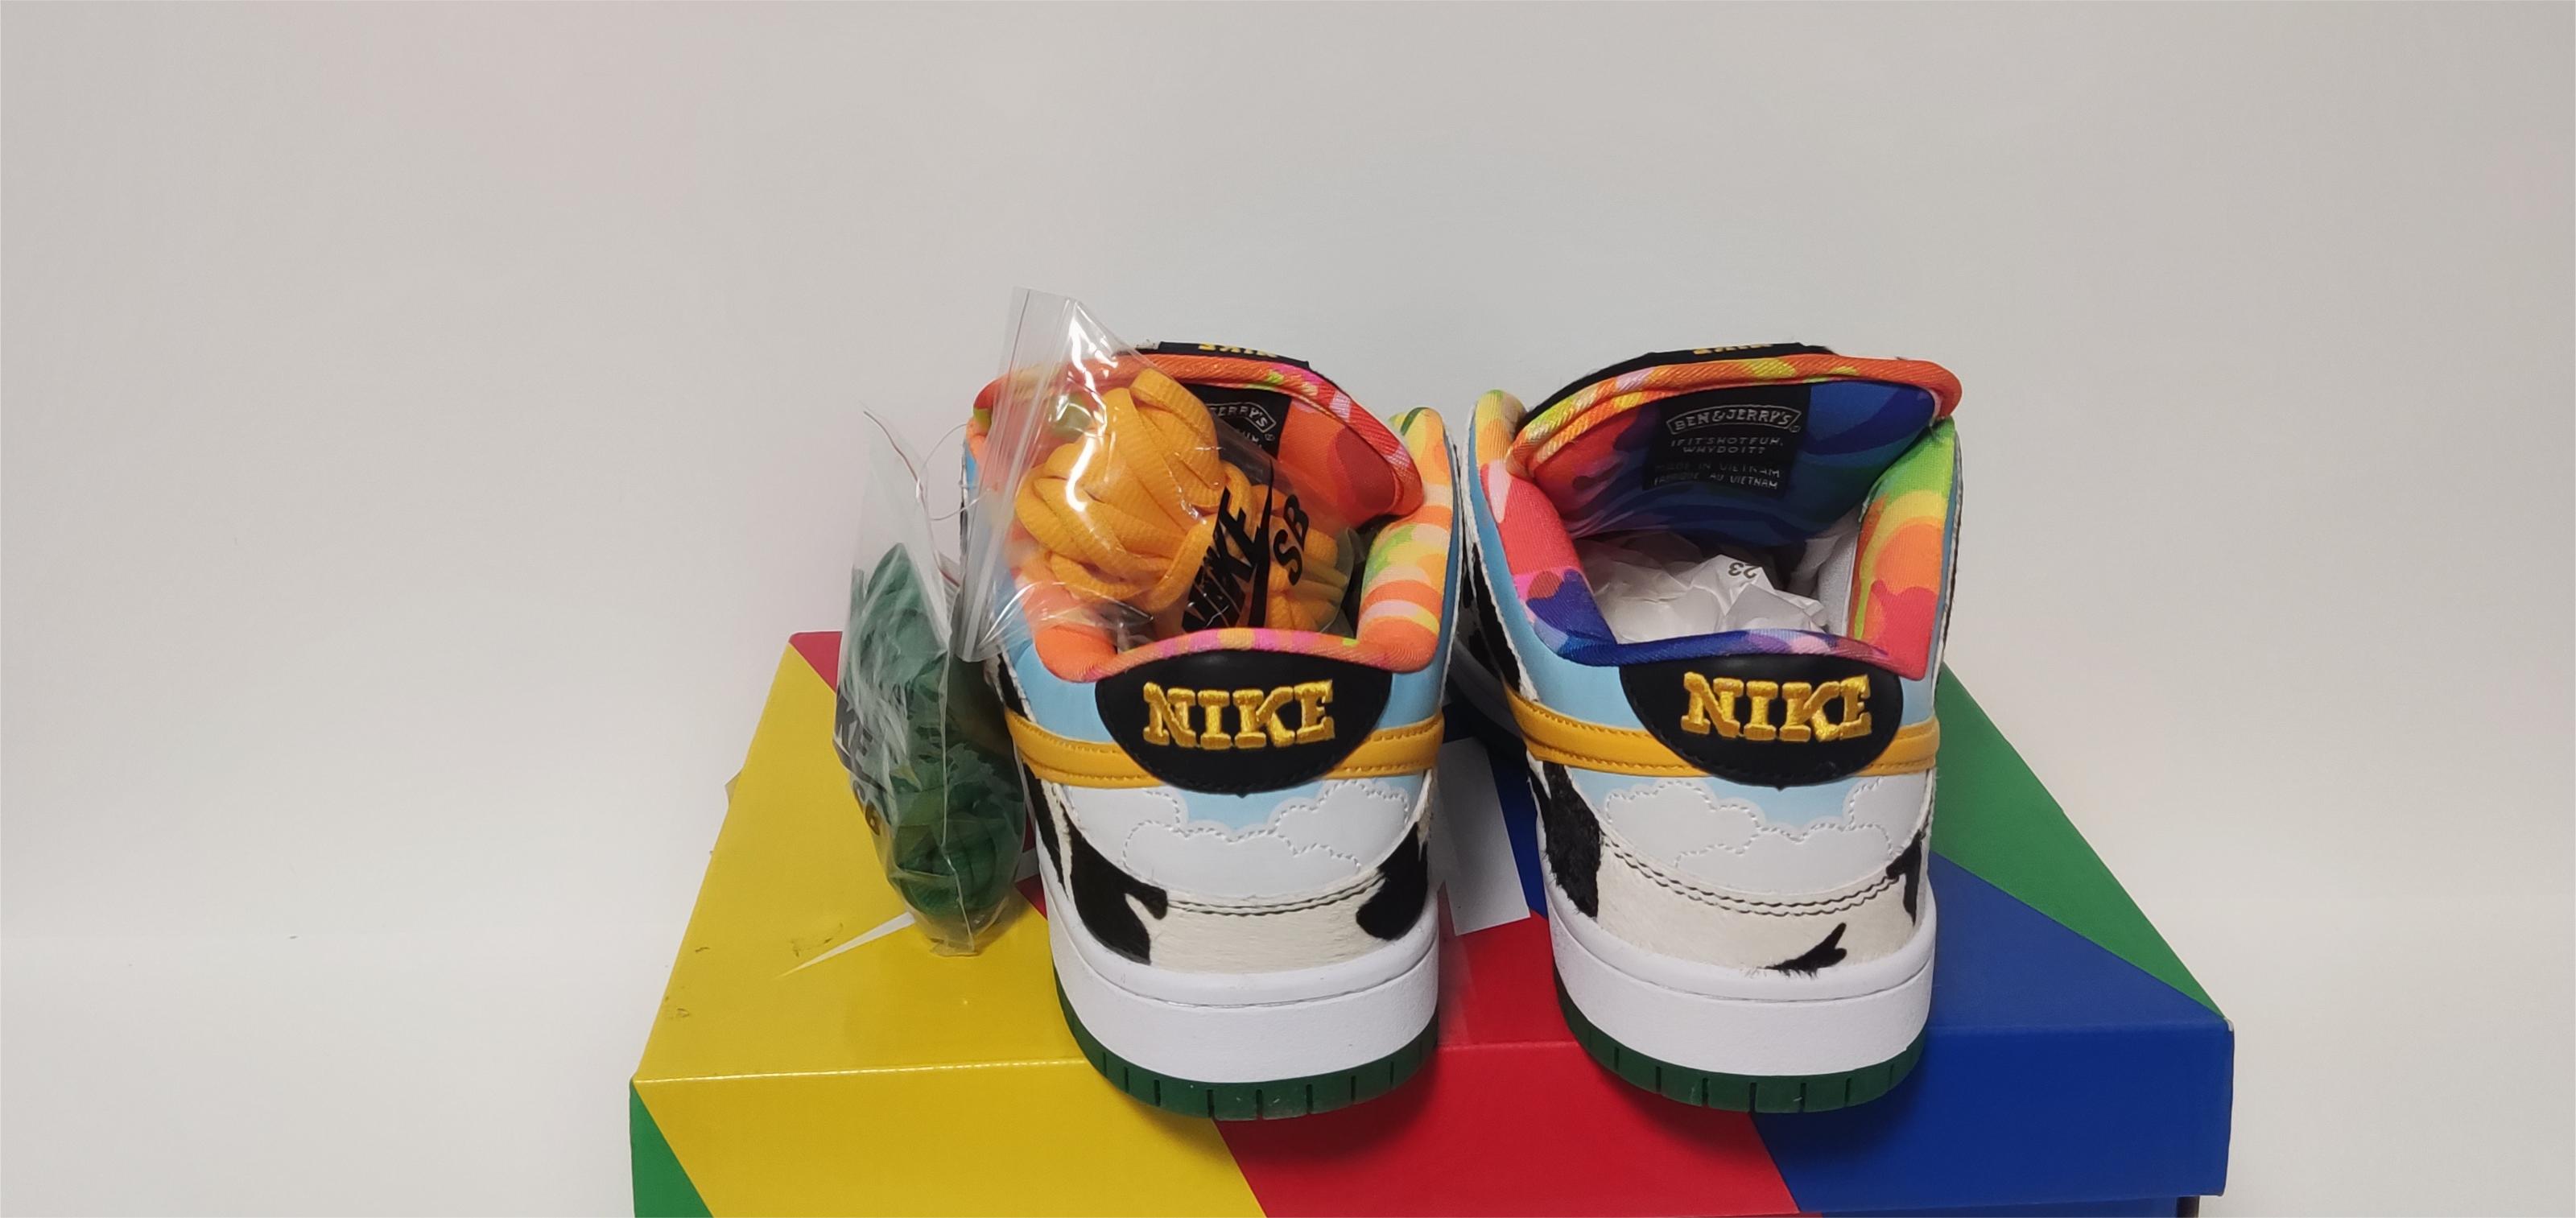 QC for OG Nike SB Dunk Low Ben & Jerry's Chunky Dunky CU3244-100